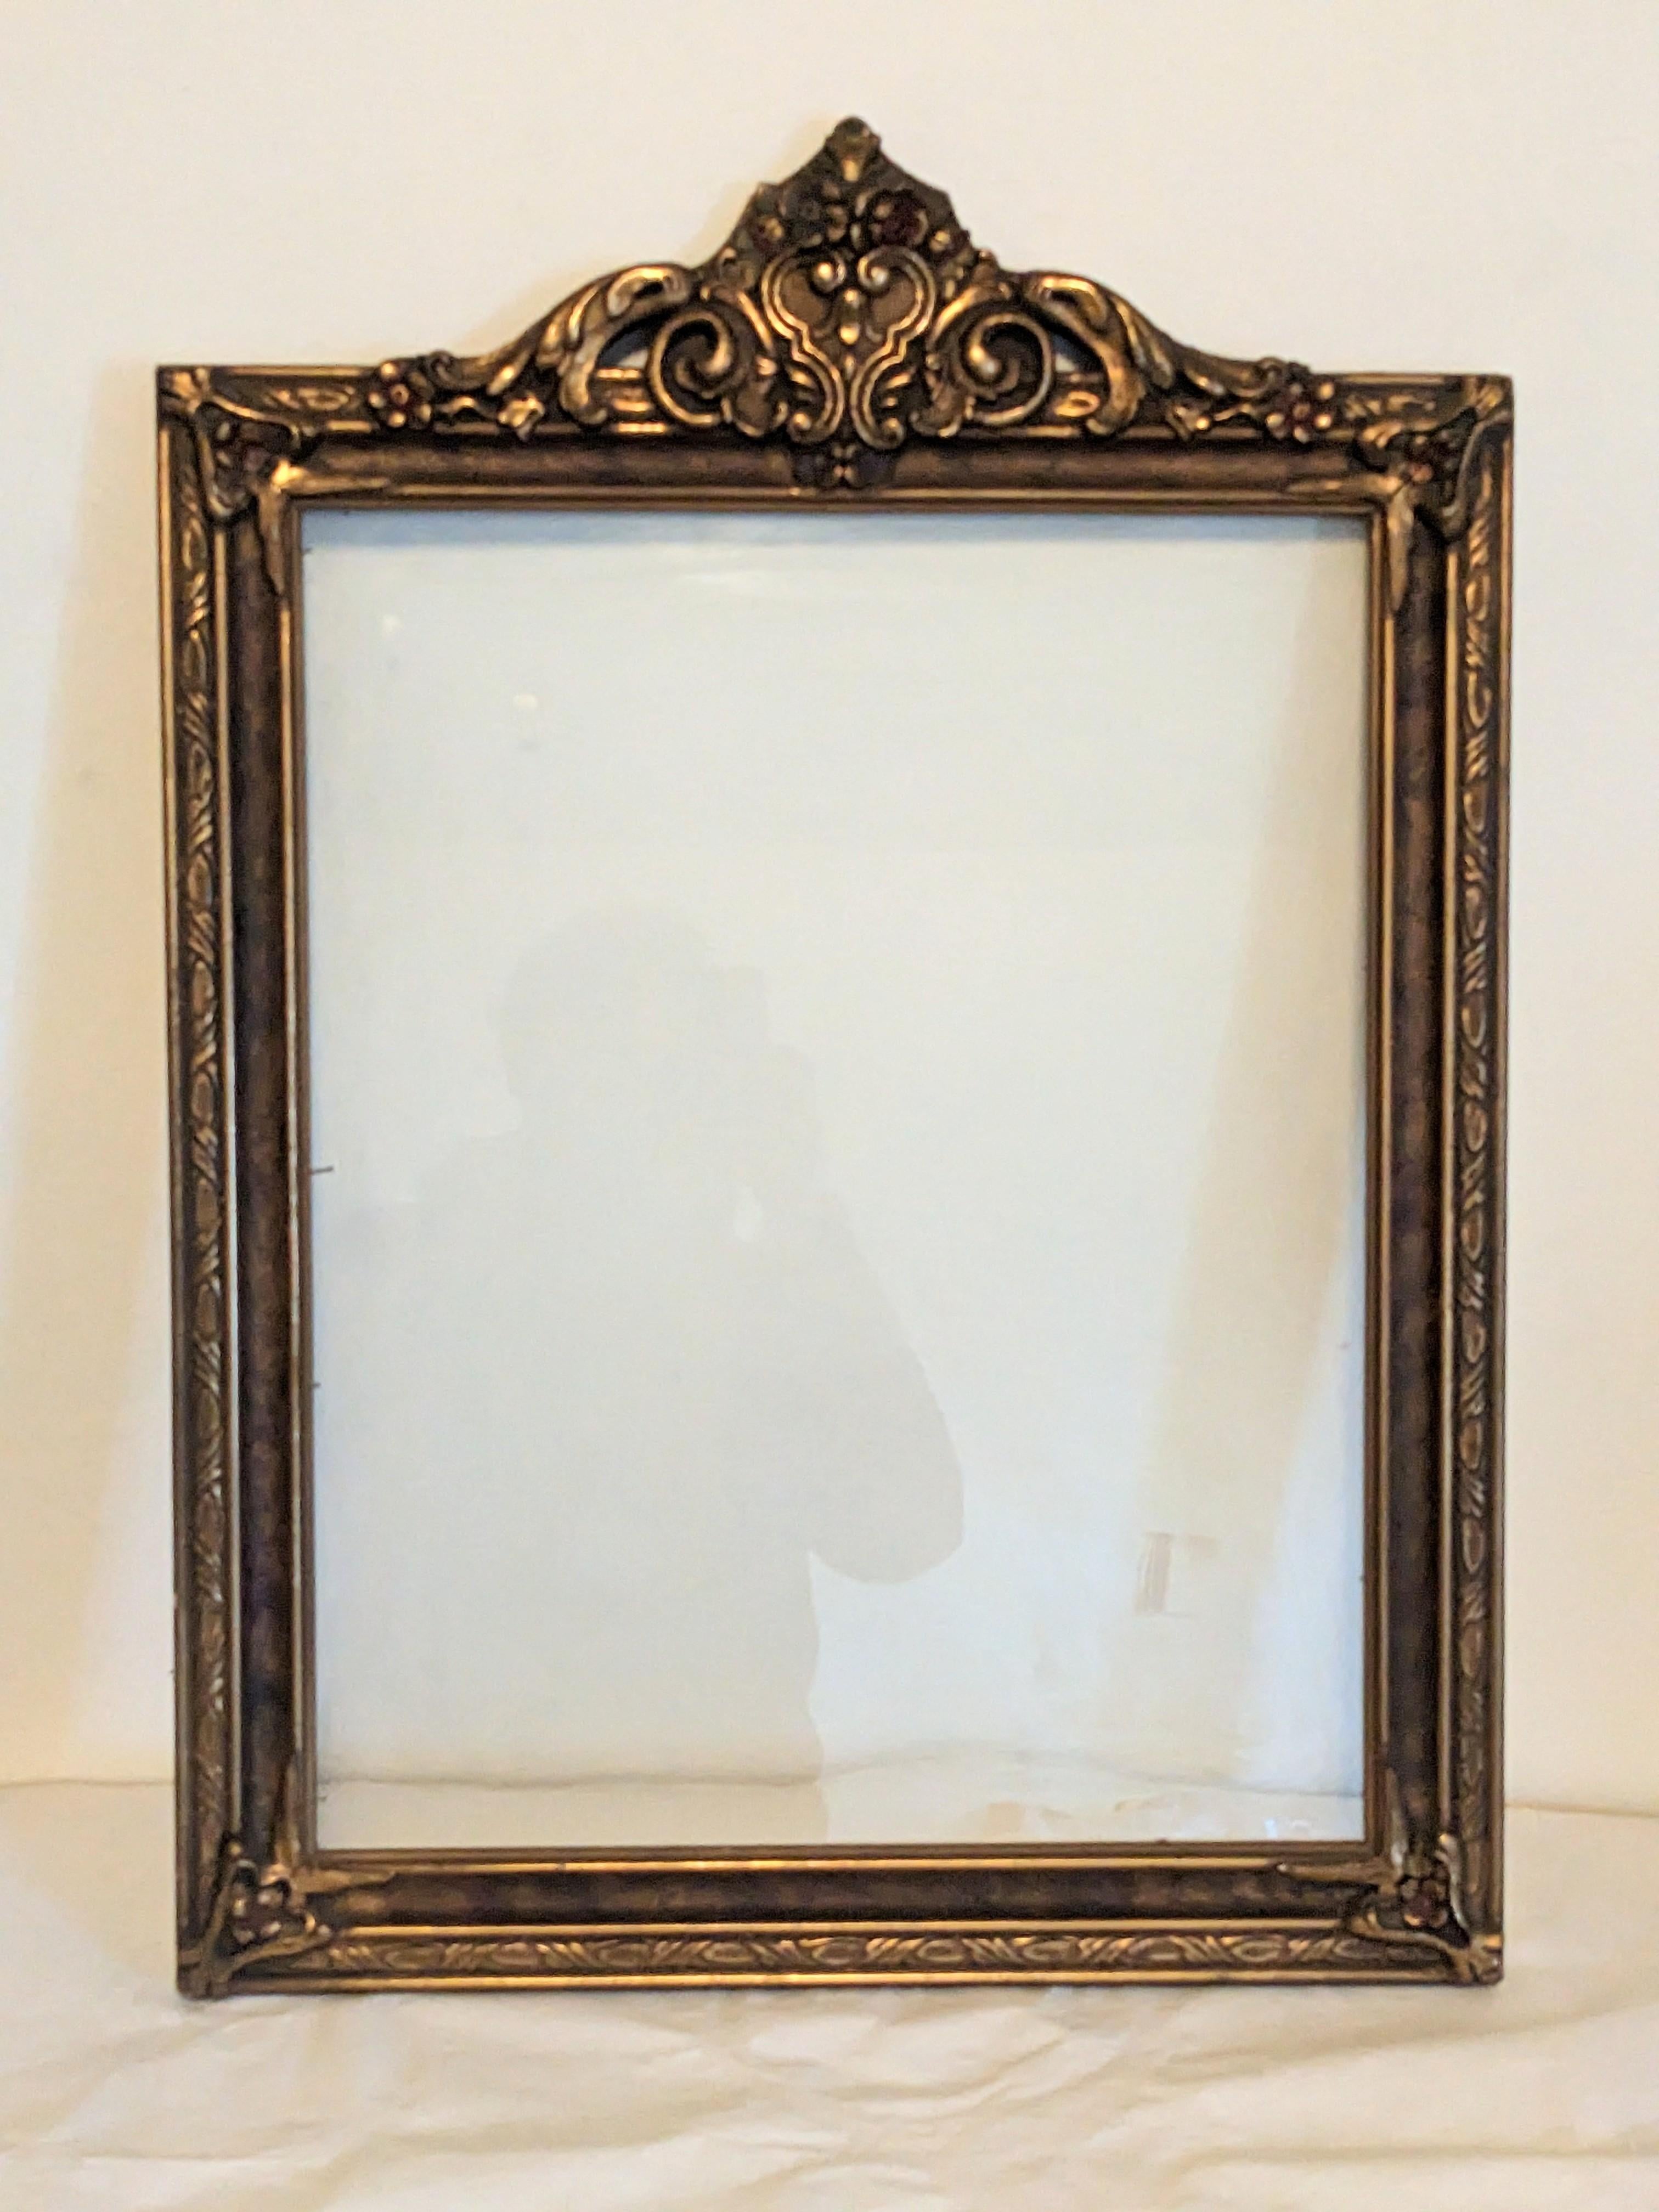 Attractive arts and crafts patinaed hand carved wood frame in a matte burnished green gold with red highlights on the flowers.
1900, USA. Measures : Glass area 20